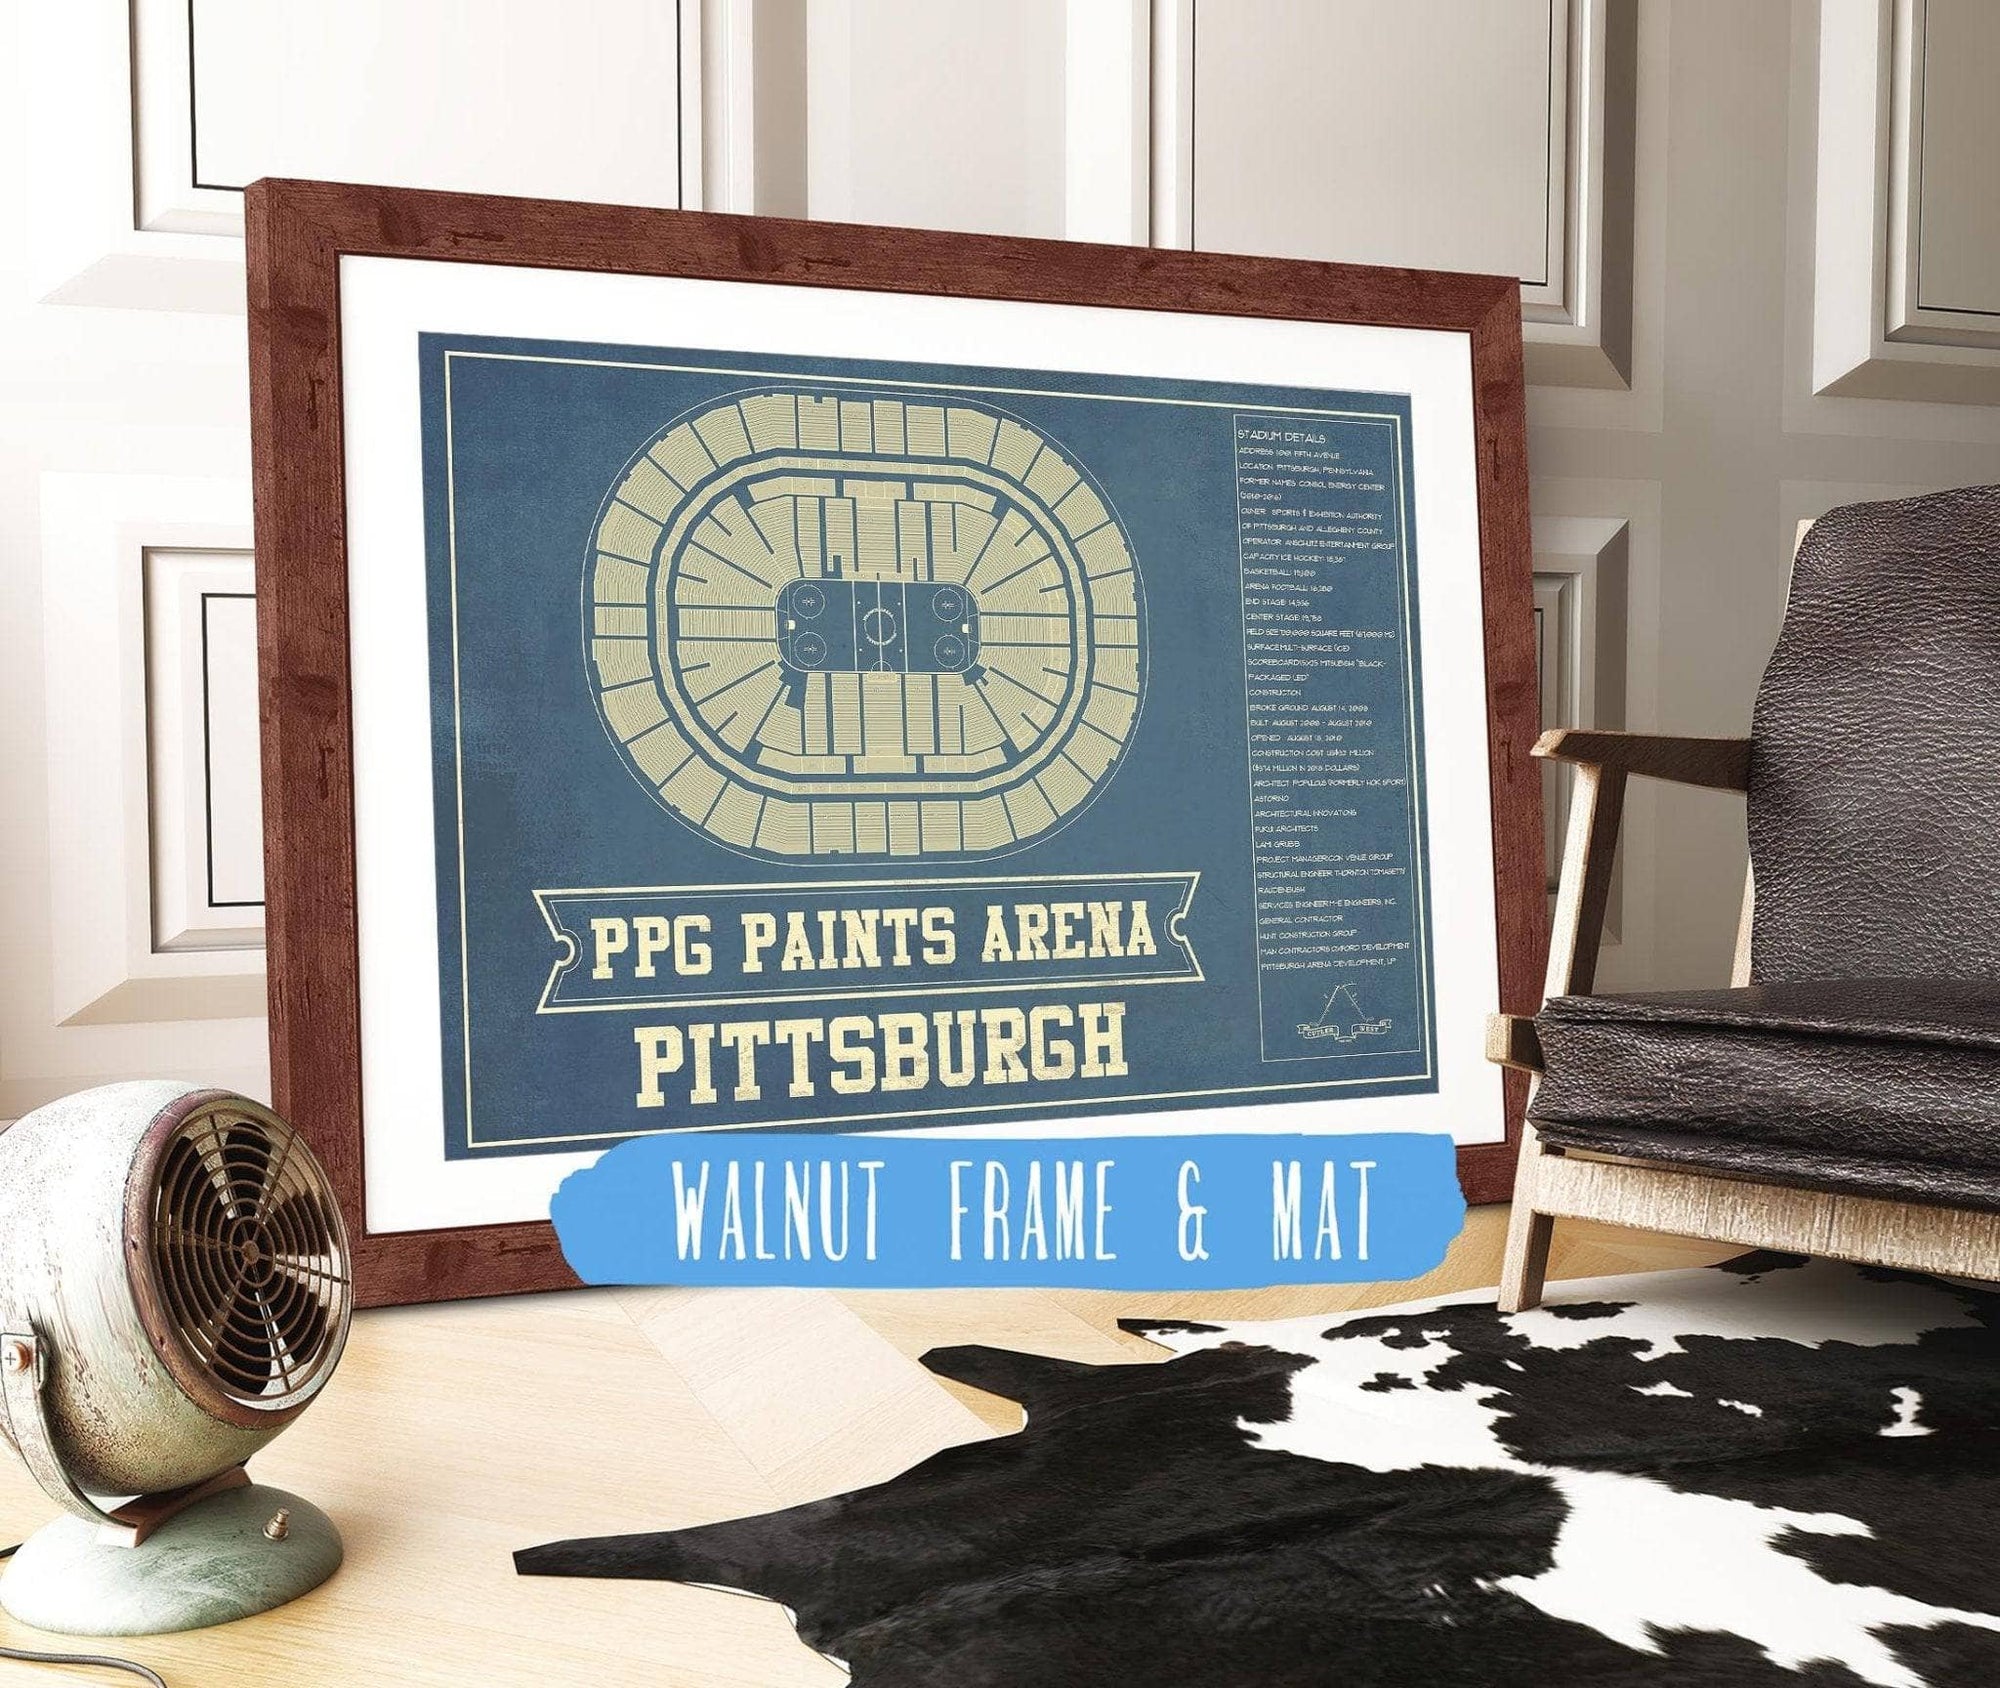 Cutler West 14" x 11" / Walnut Frame & Mat Pittsburgh Penguins PPG Paints Arena Seating Chart - Vintage Hockey Print 659983736_80856